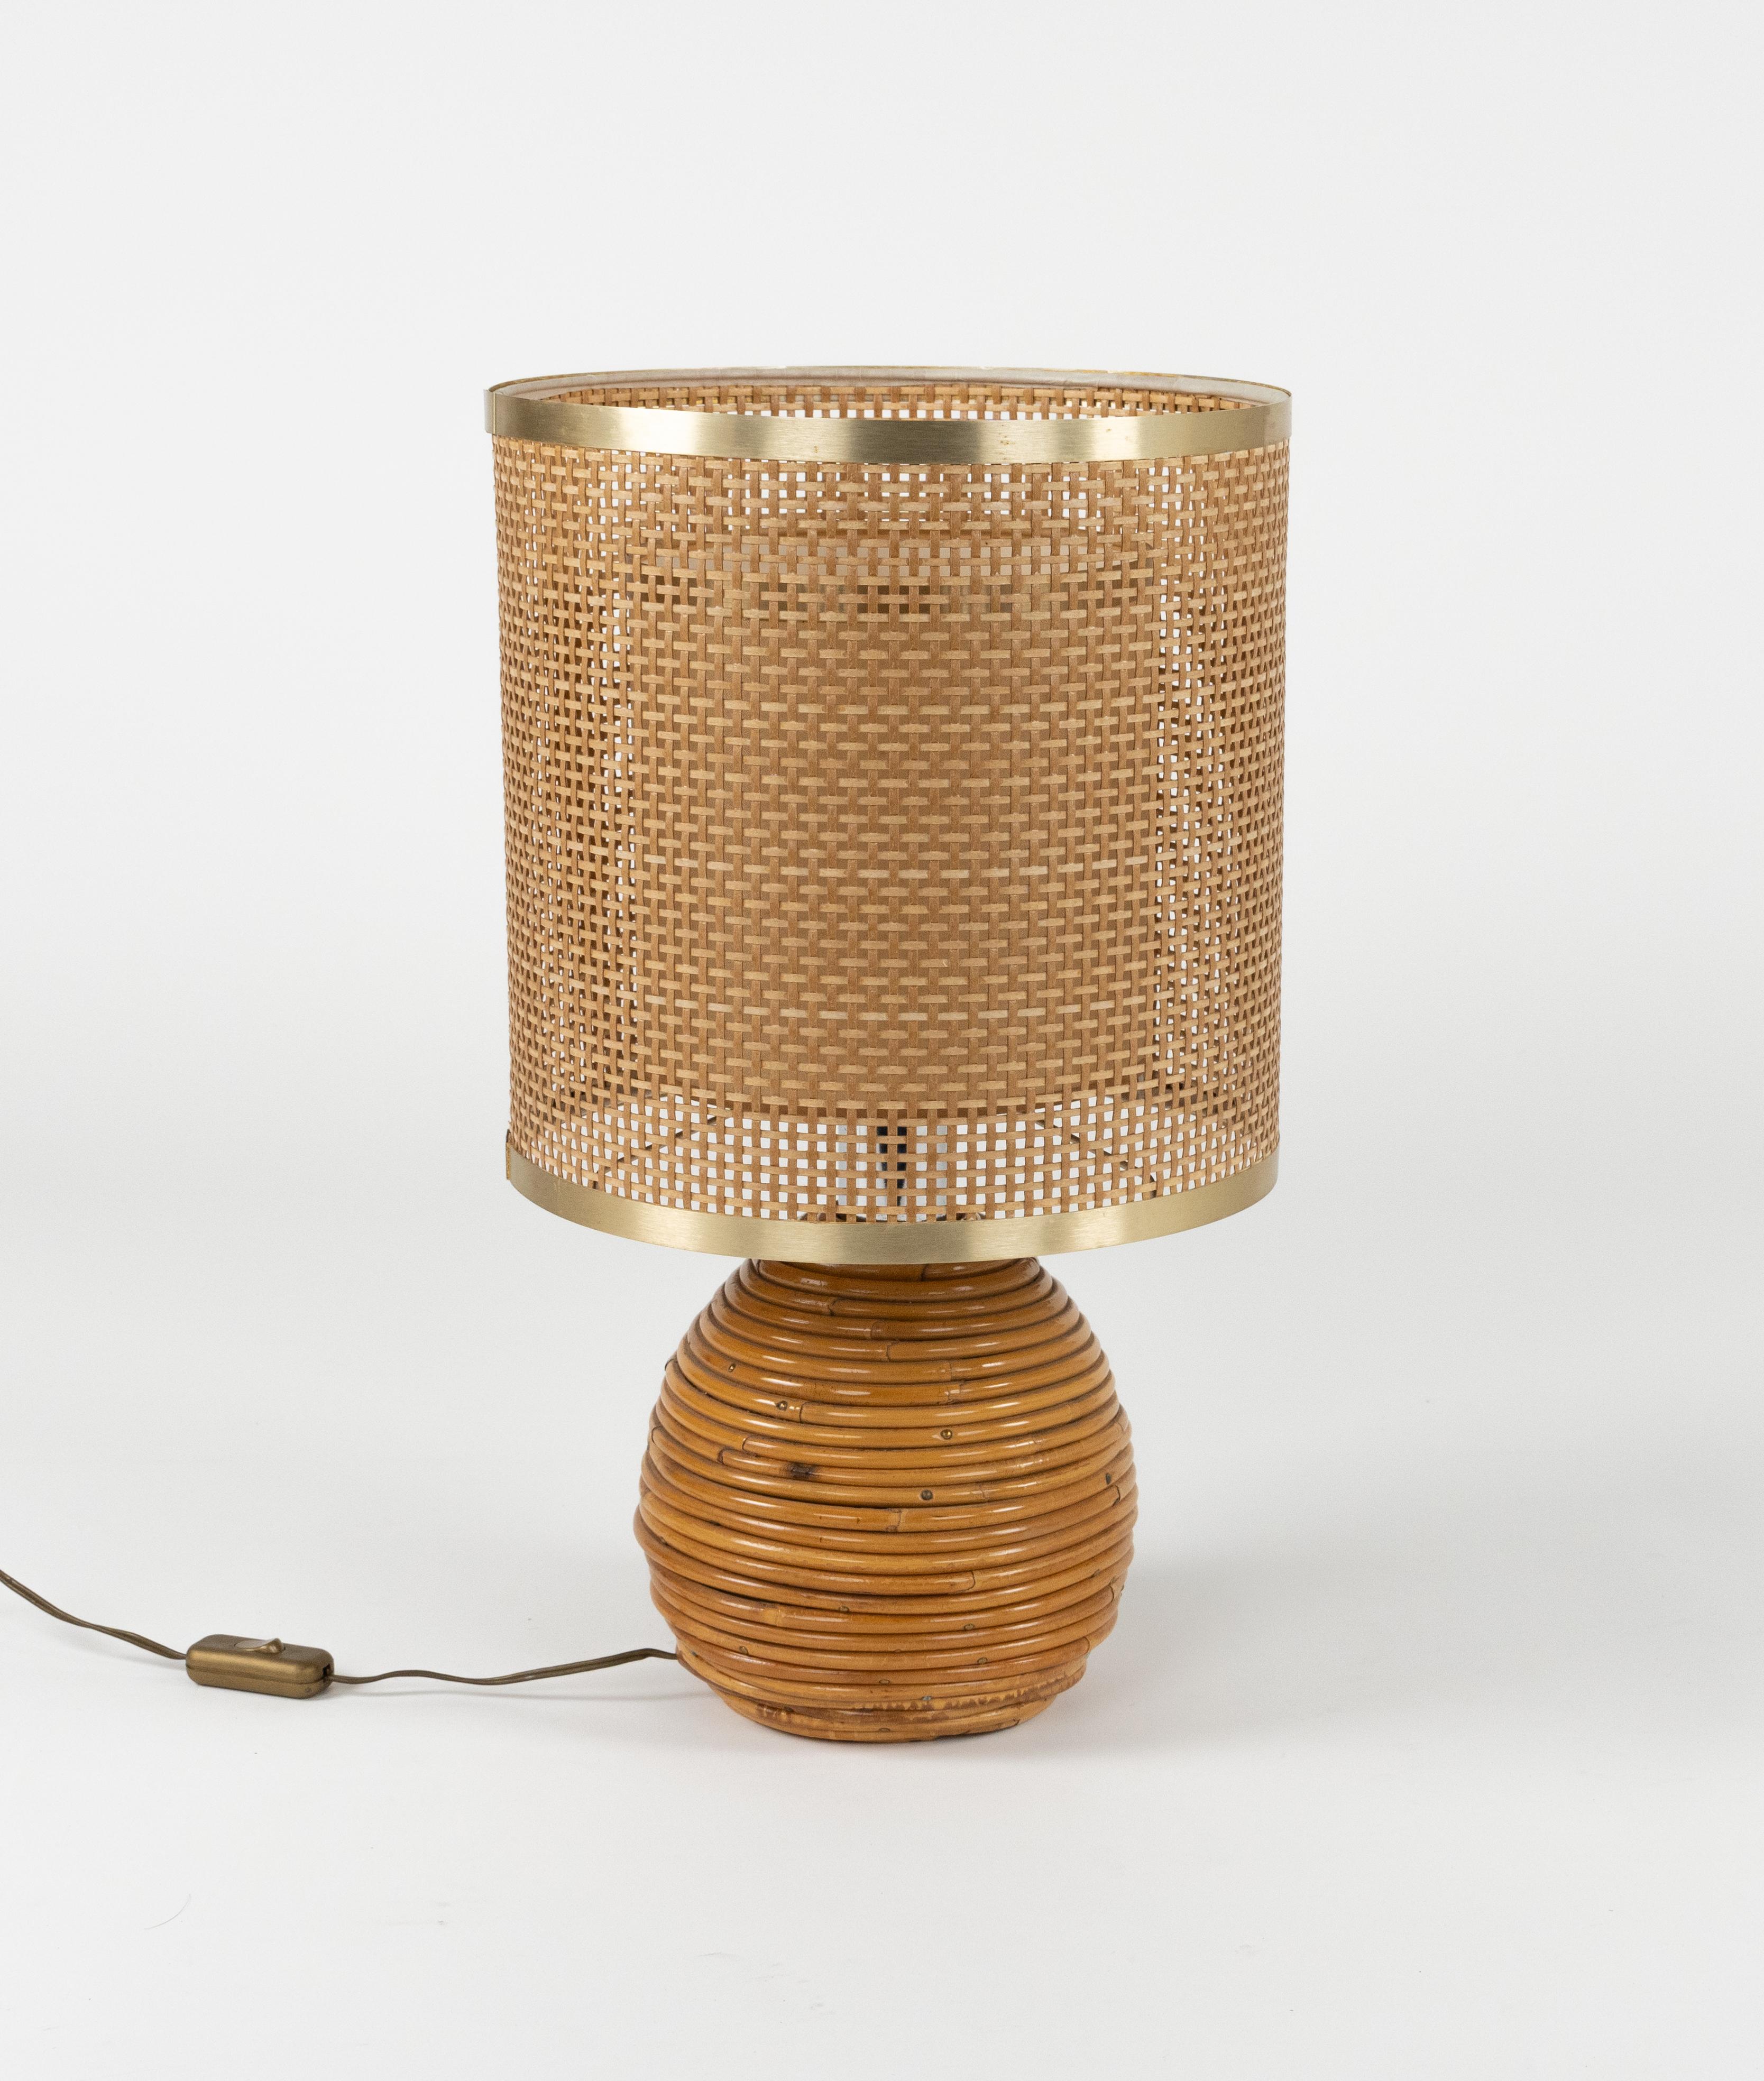 Metal Midcentury Rattan, Wicker and Chrome Table Lamp by Vivai Del Sud, Italy 1970s For Sale